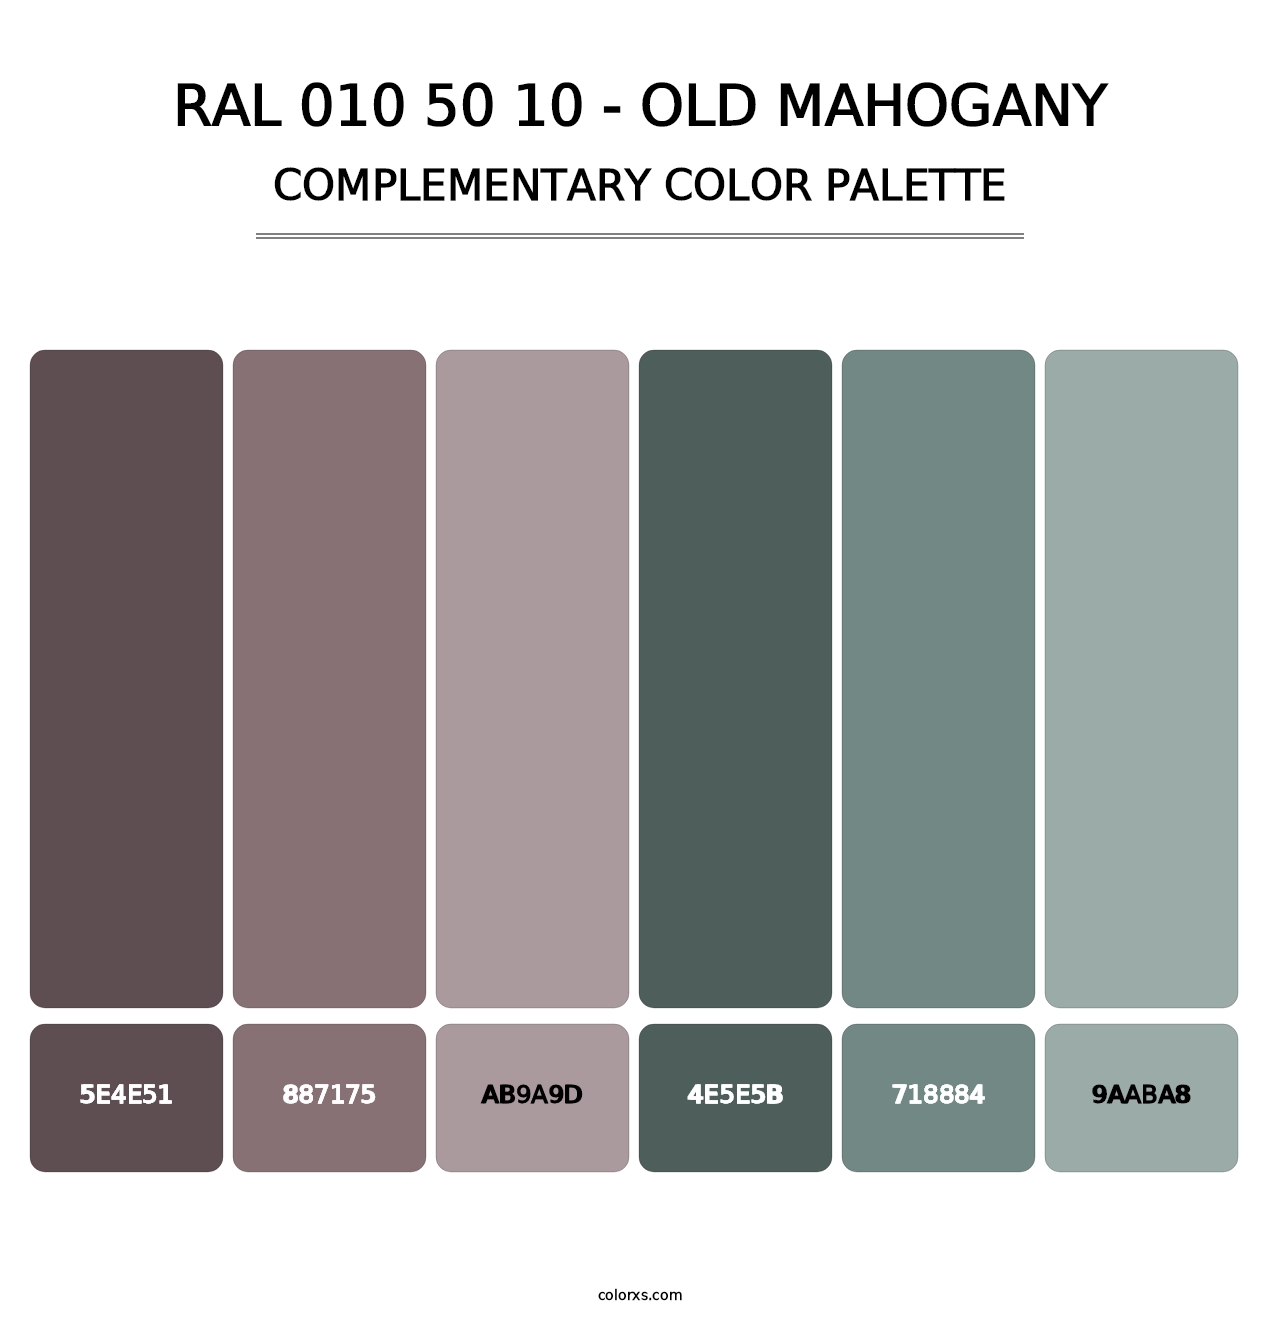 RAL 010 50 10 - Old Mahogany - Complementary Color Palette